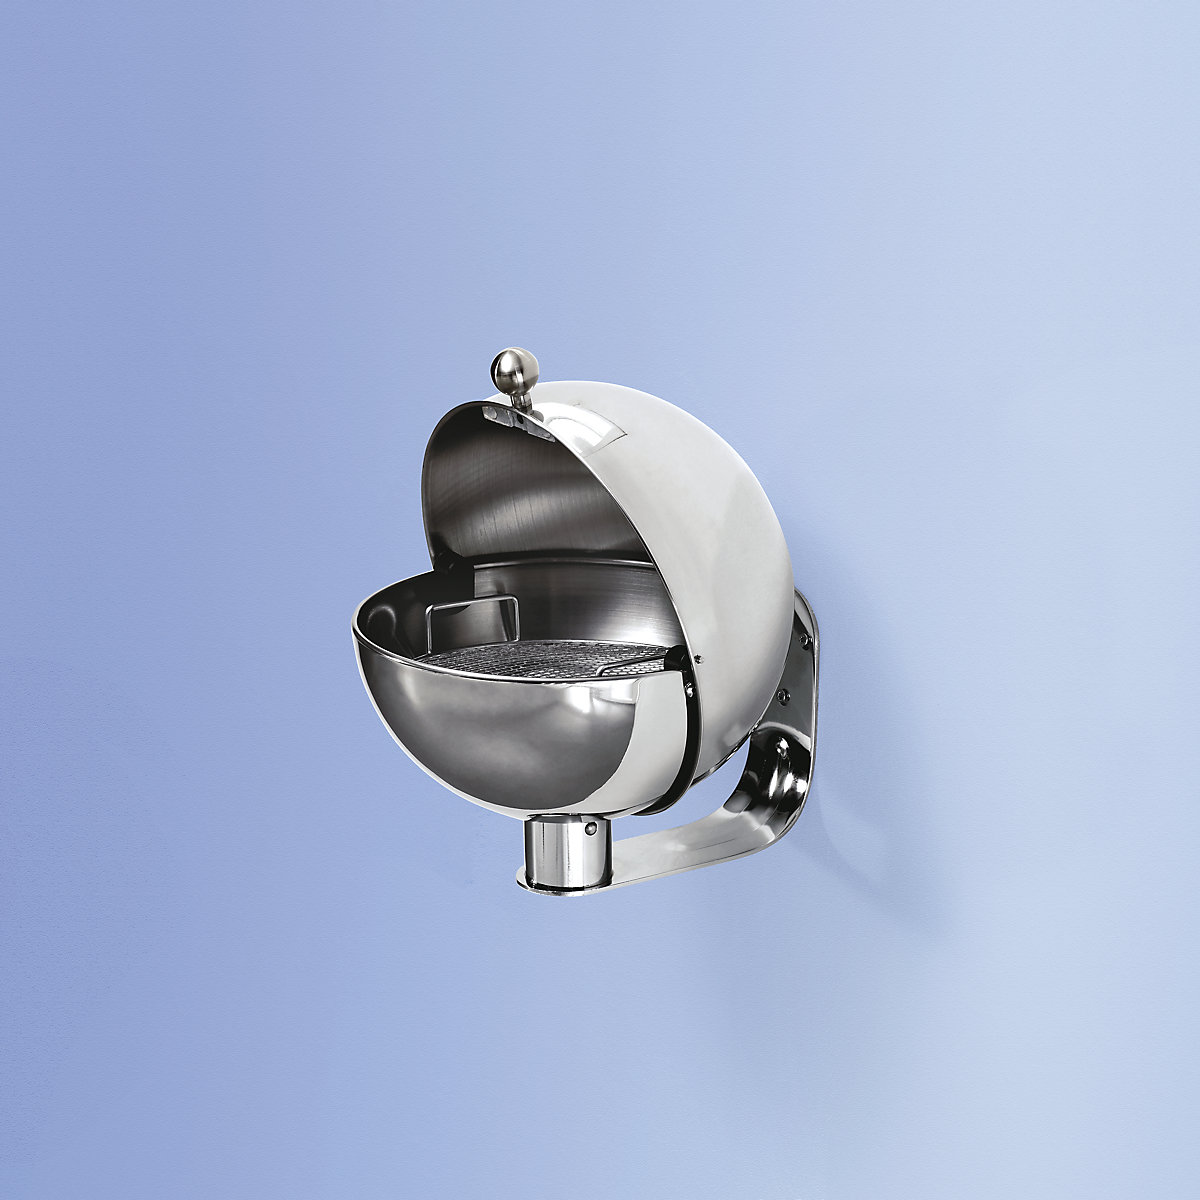 VAR – Spherical wall ashtray made of stainless steel (Product illustration 2)